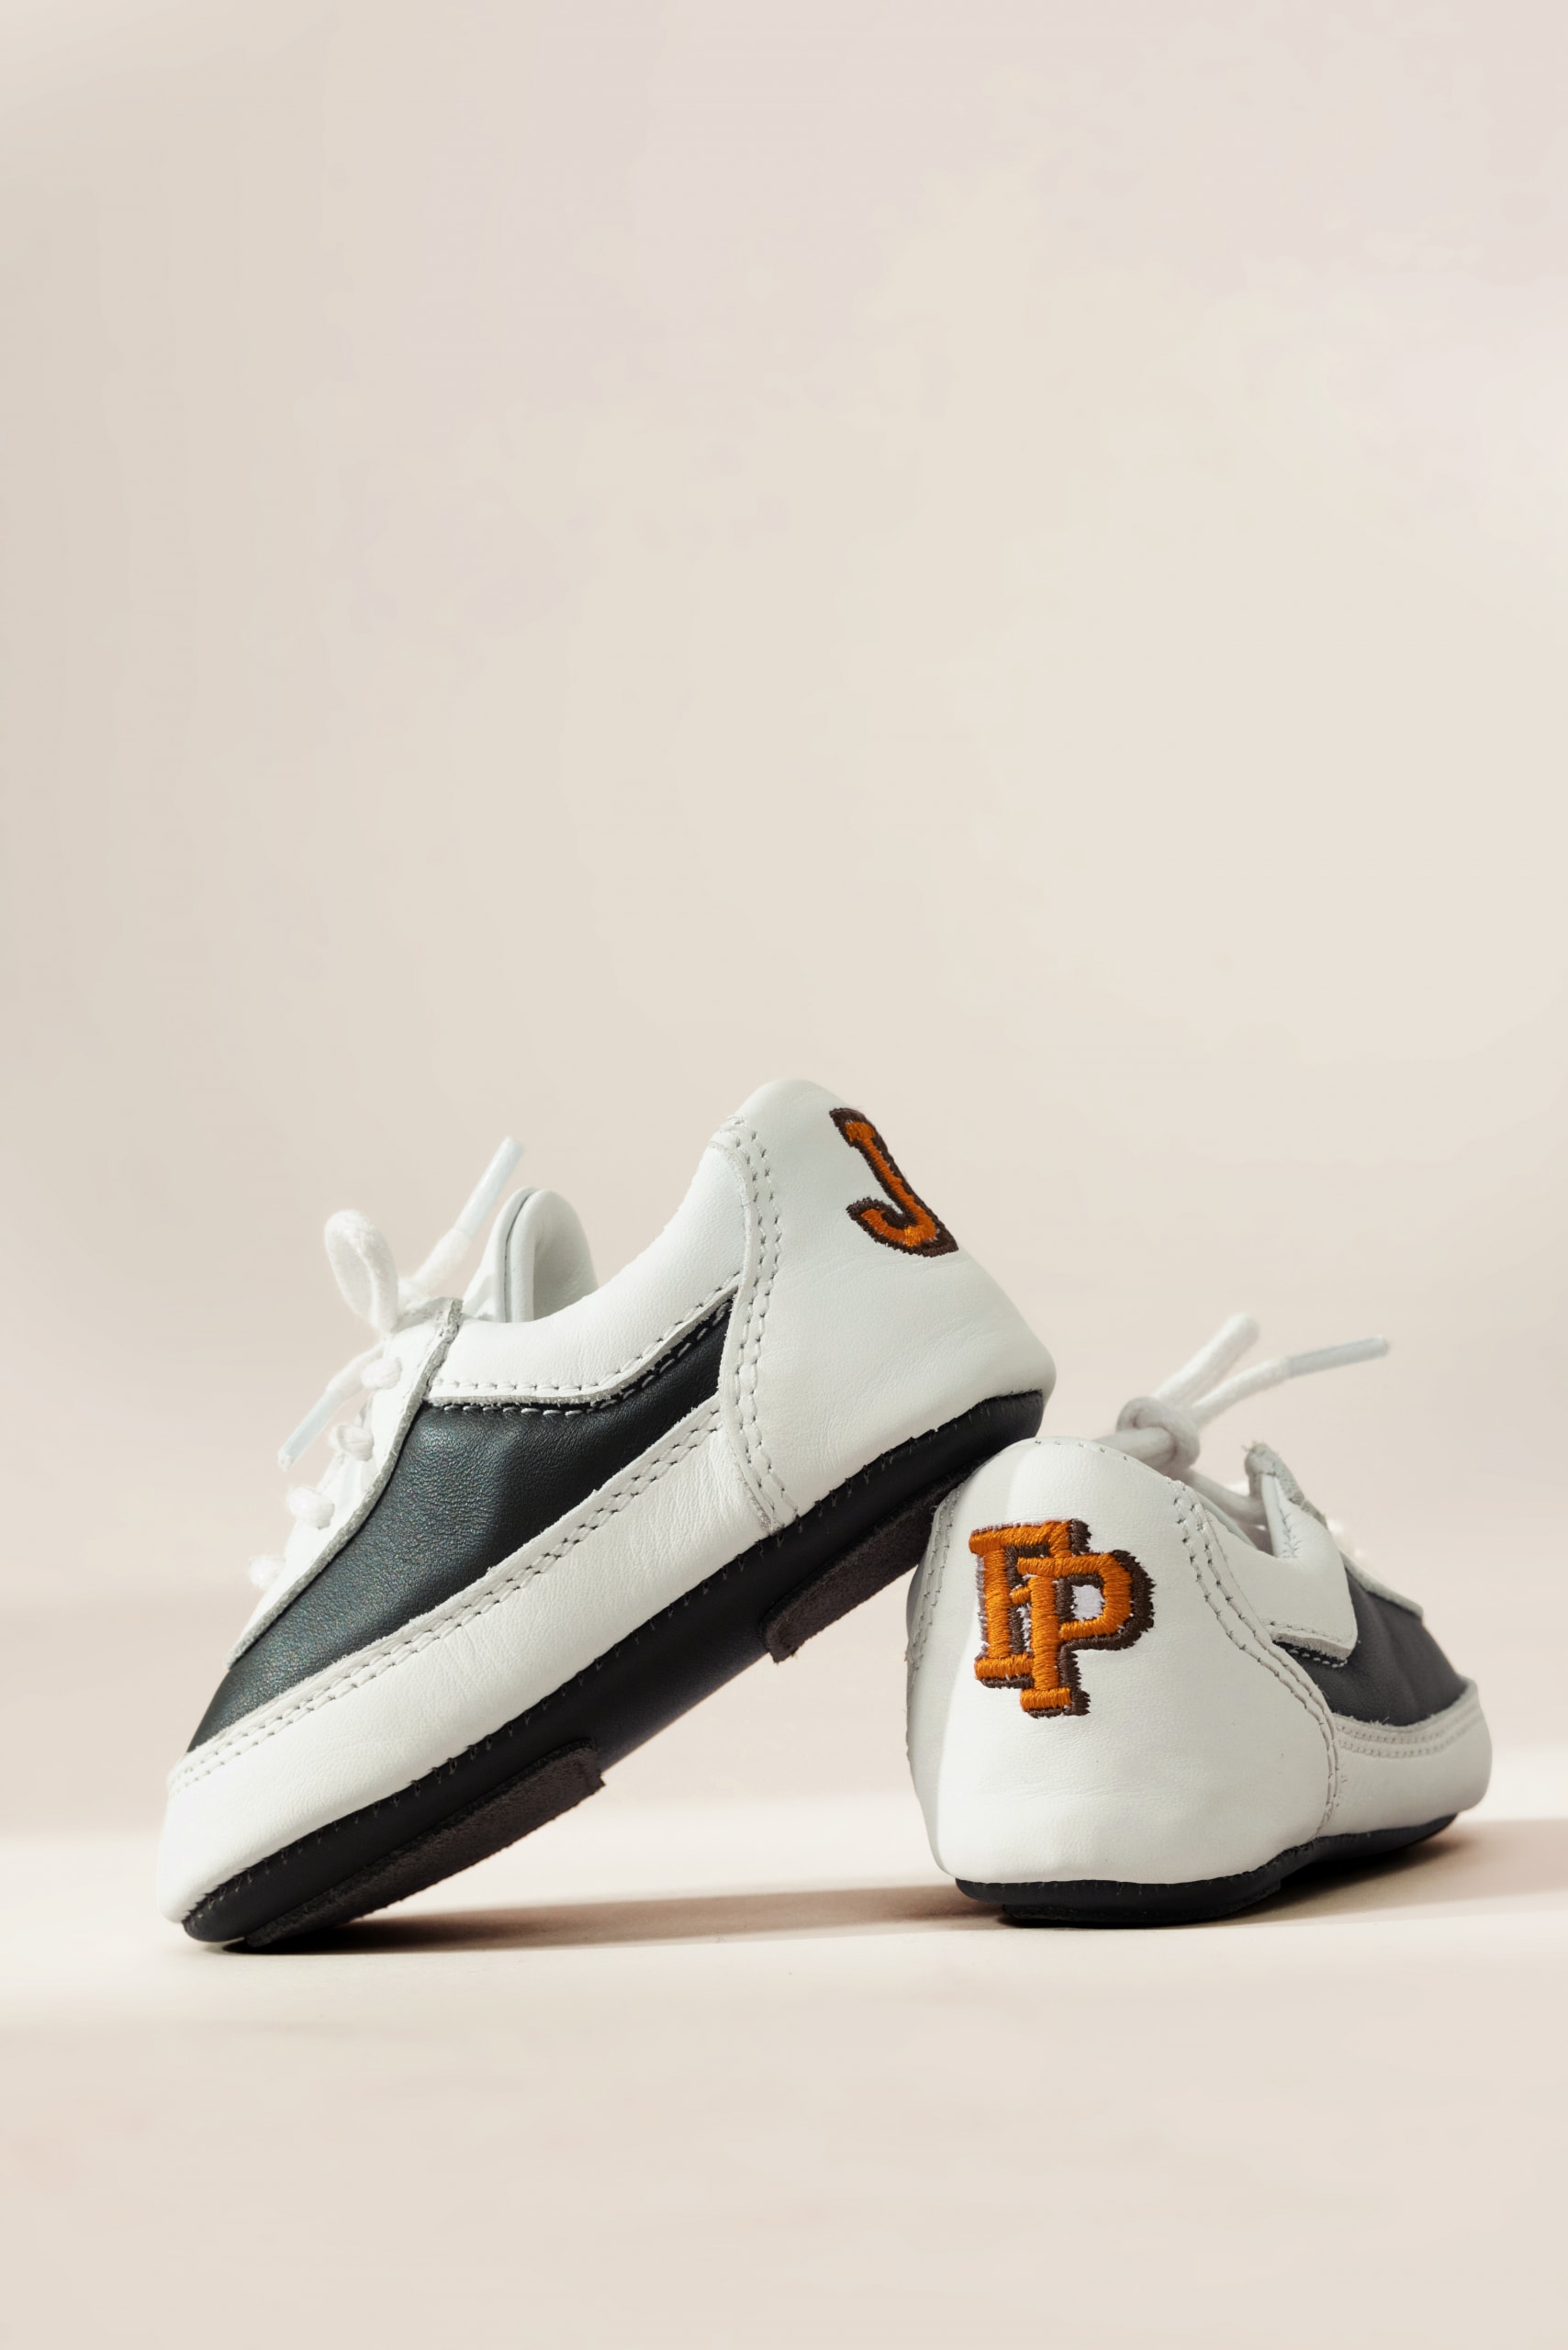 Amsterdam's Filling Pieces and Joolz in Unexpected Stroller Collaboration